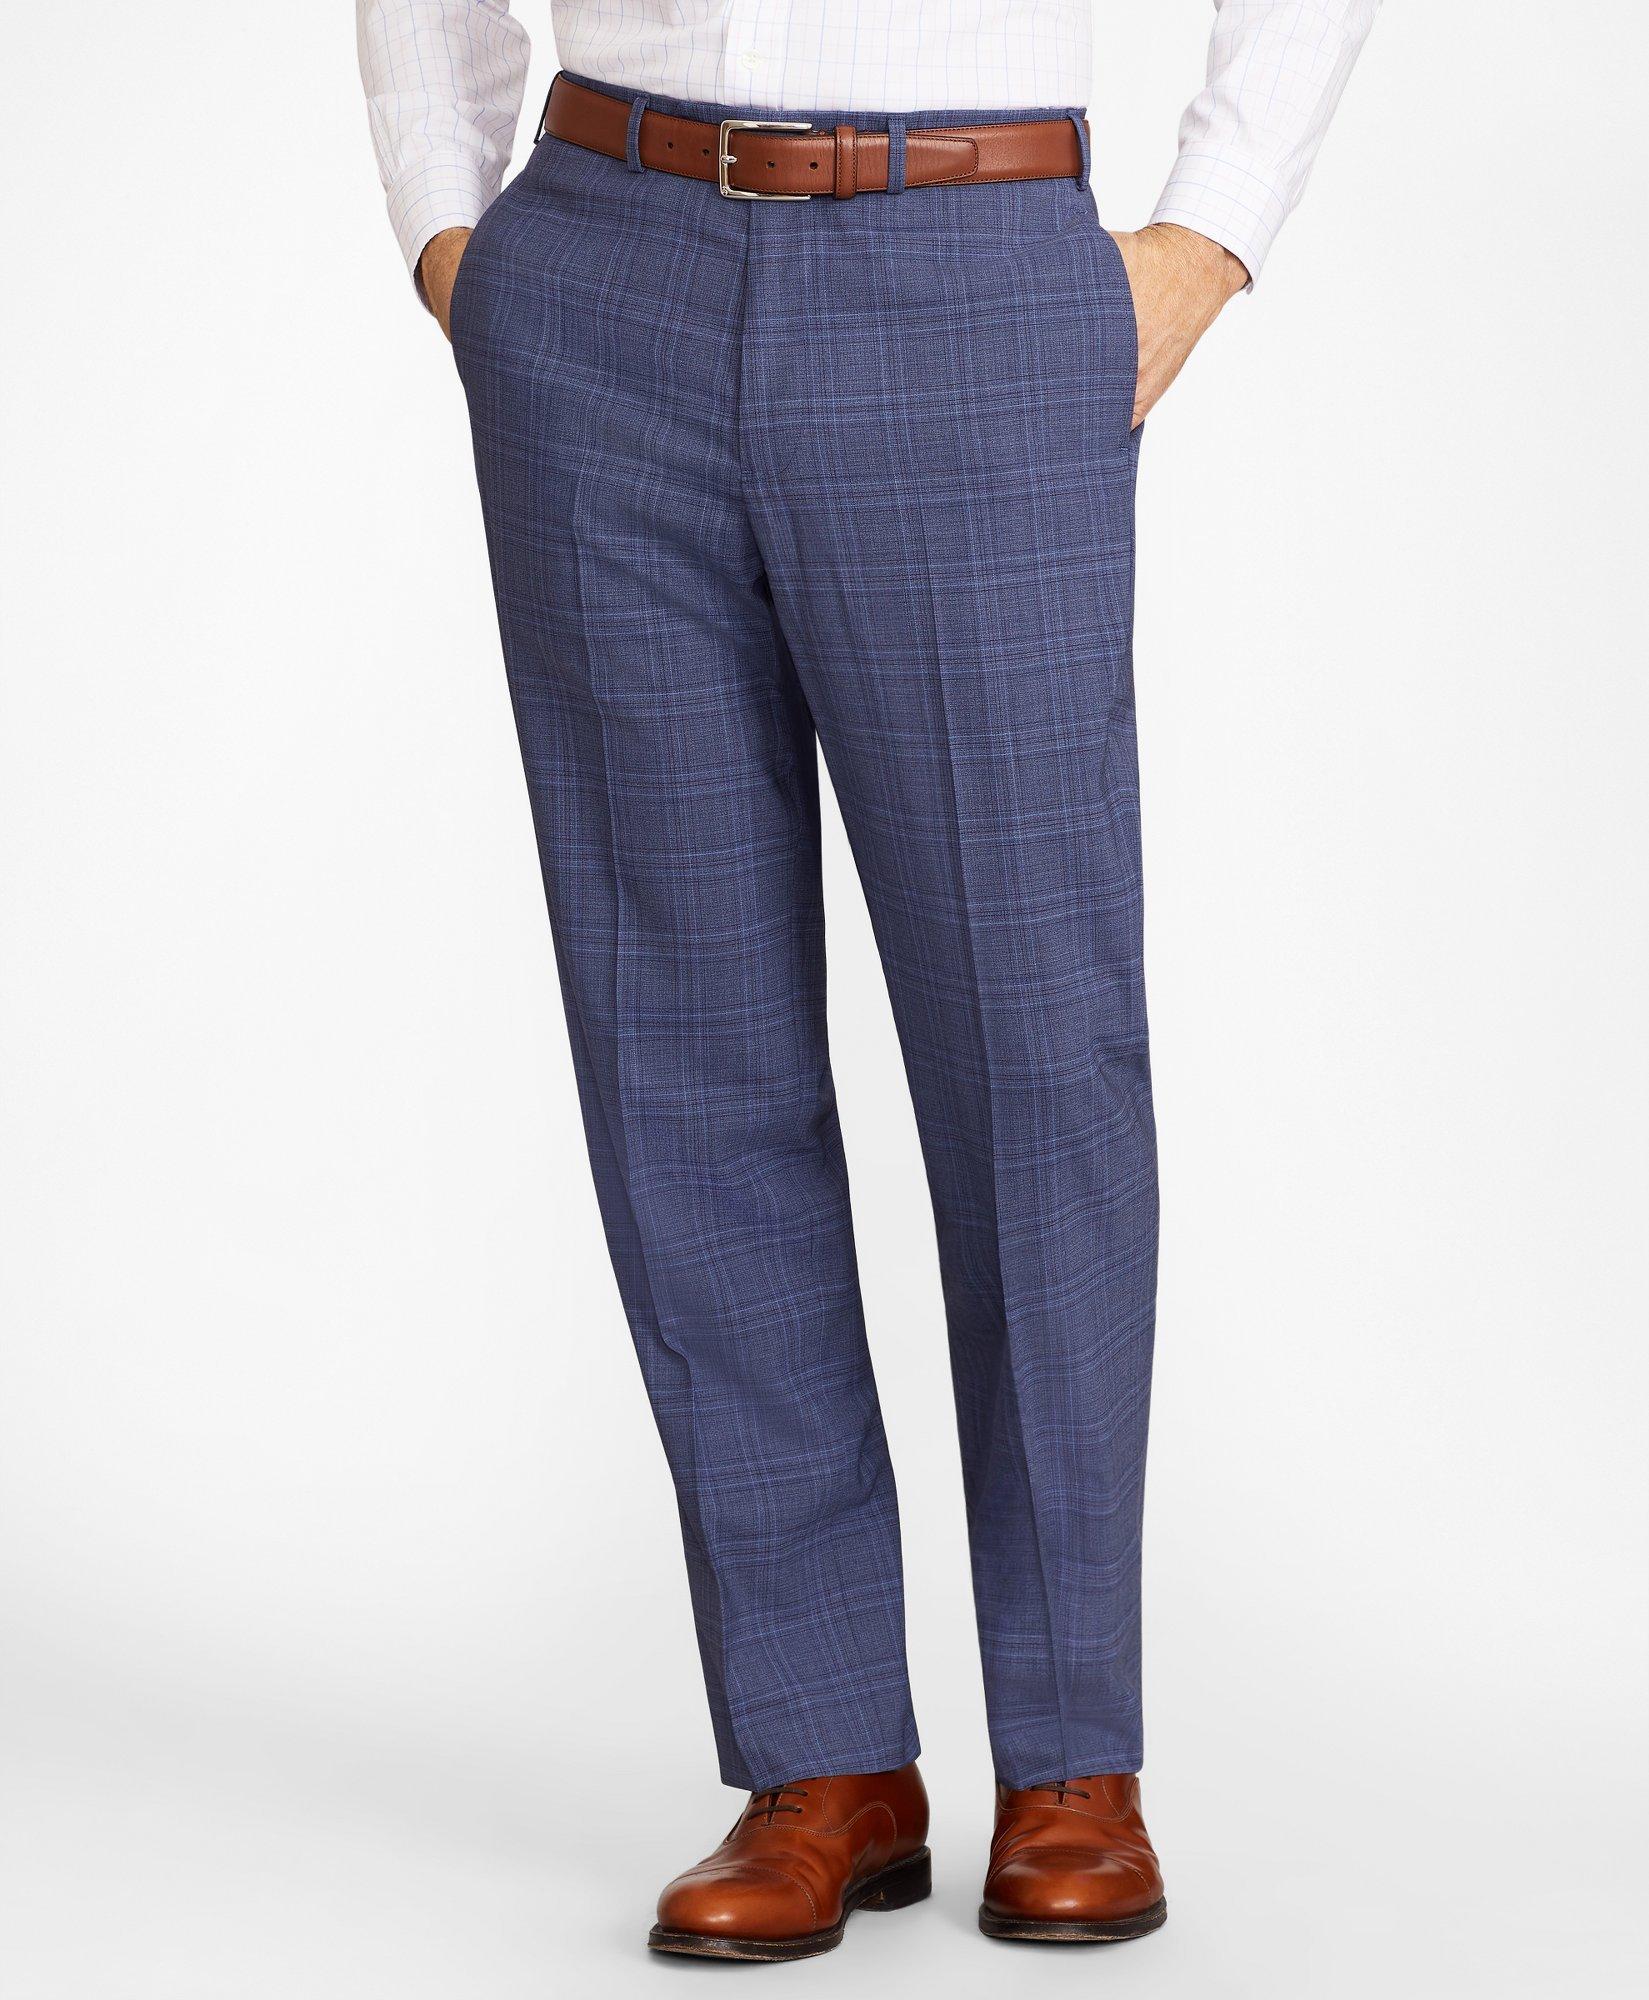 Brooks Brothers Madison Fit Plain Front Cotton Dress Trousers, $168, Brooks Brothers